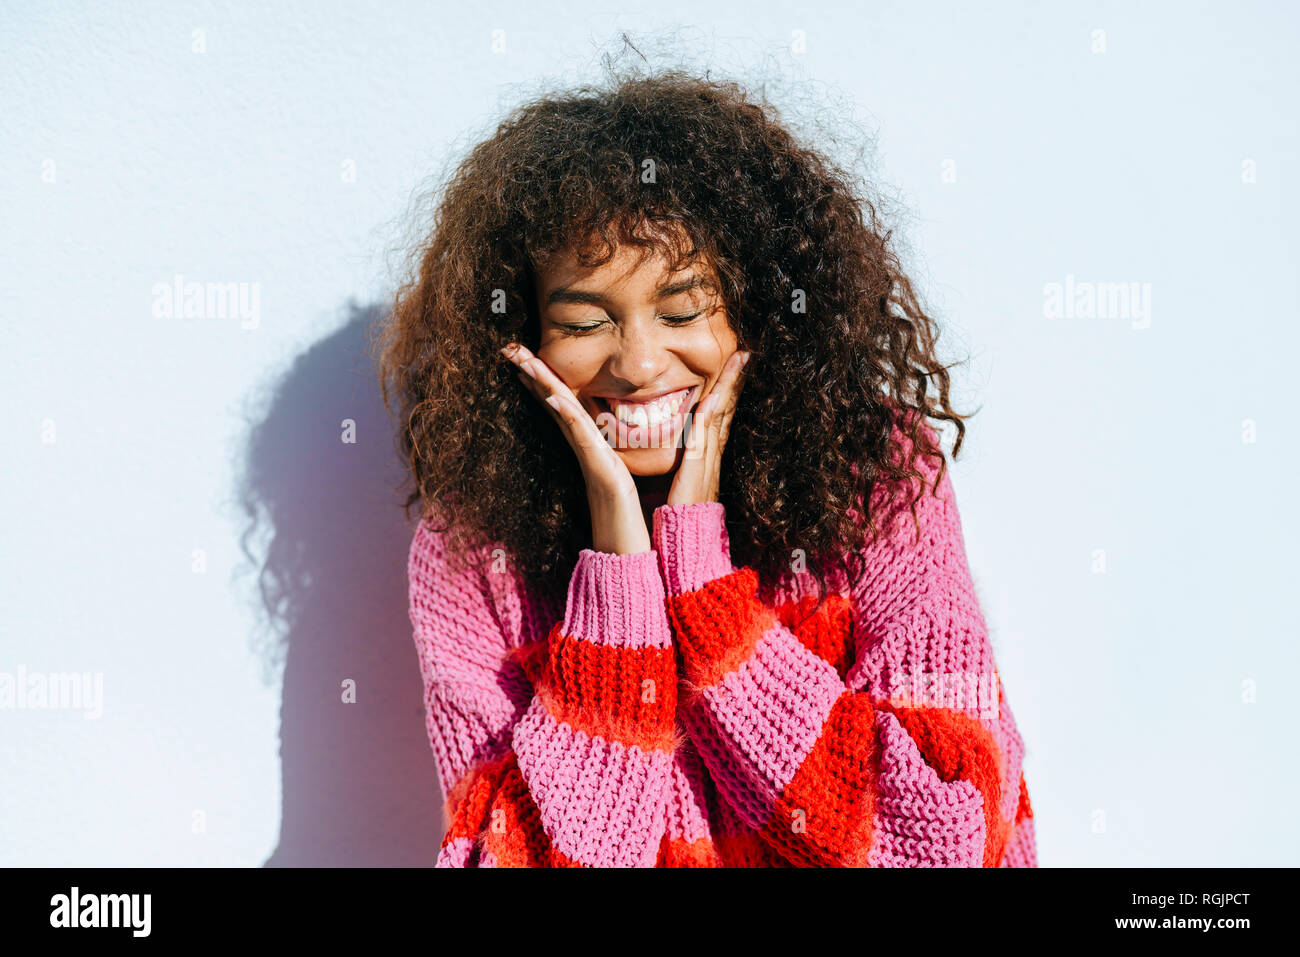 Portrait of laughing young woman with curly hair against white wall Stock Photo